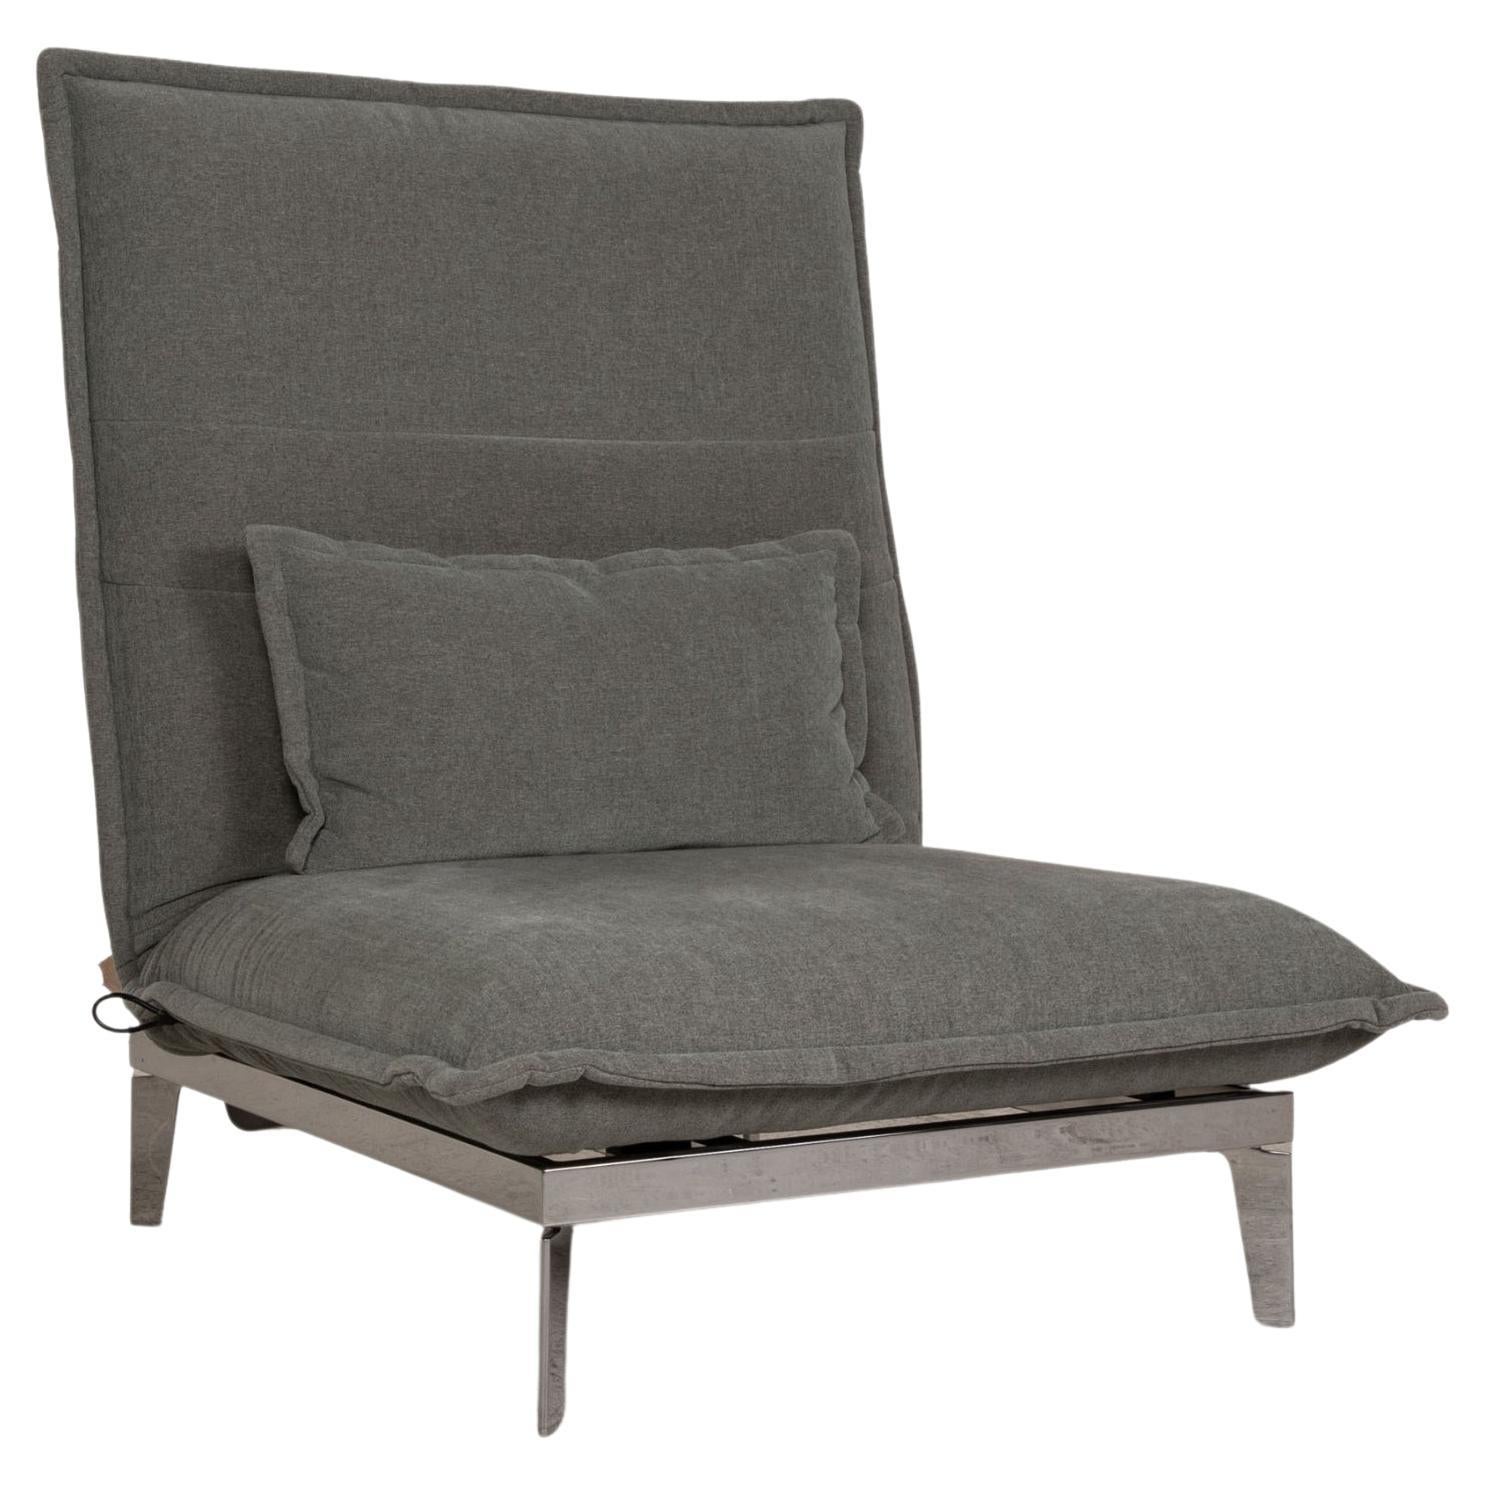 Rolf Benz Nova 340 Fabric Armchair Gray Function Relax Function For Sale